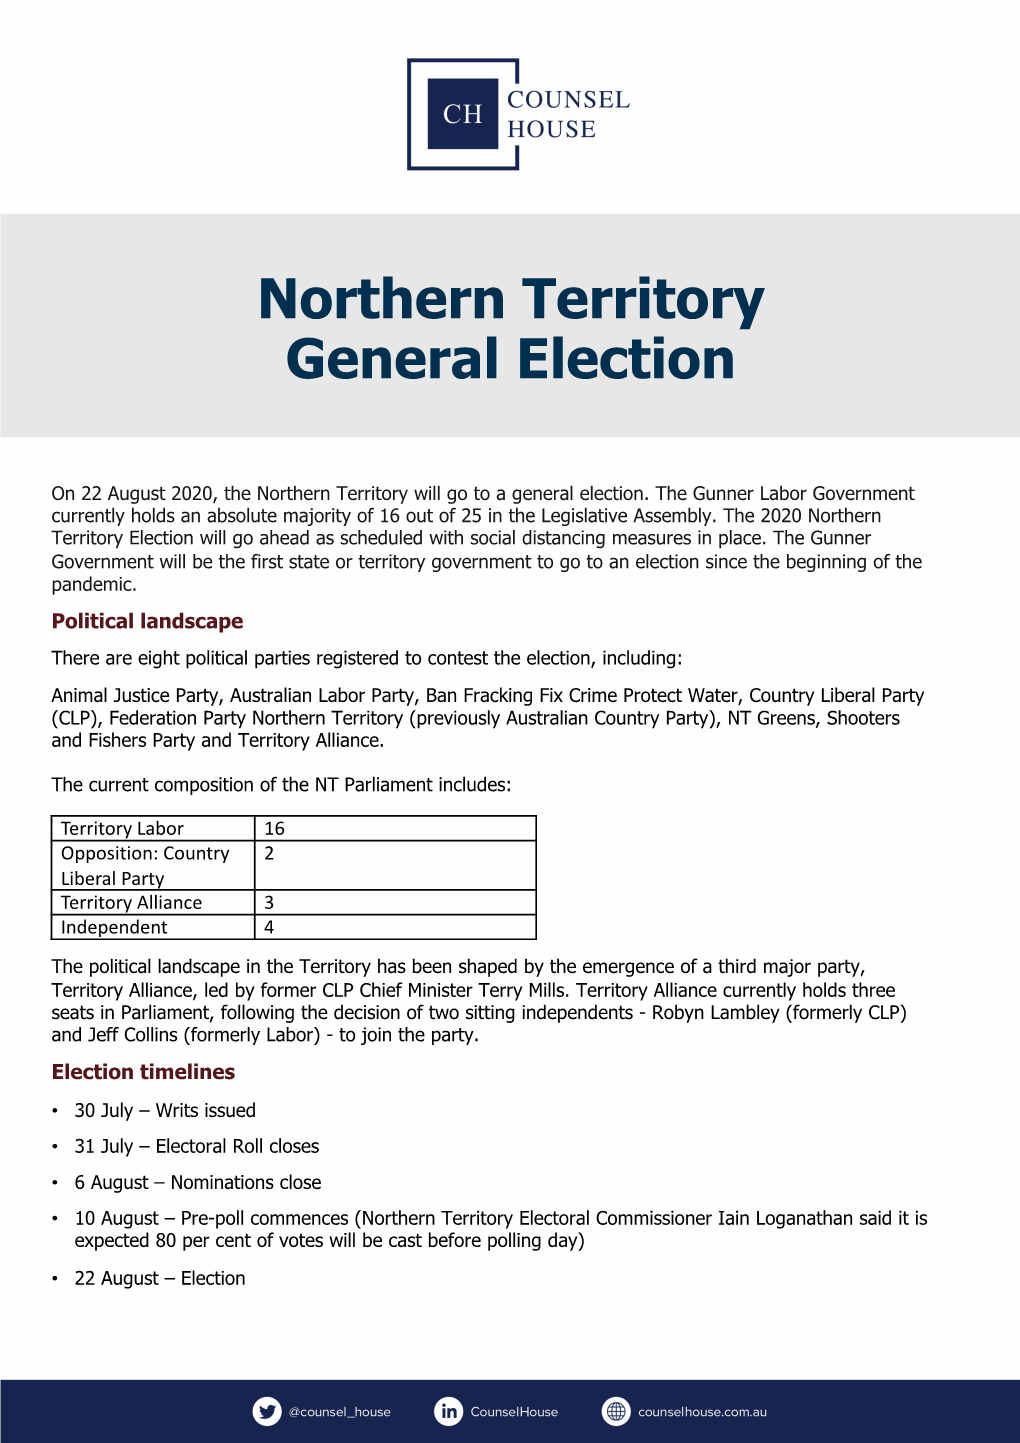 Northern Territory General Election